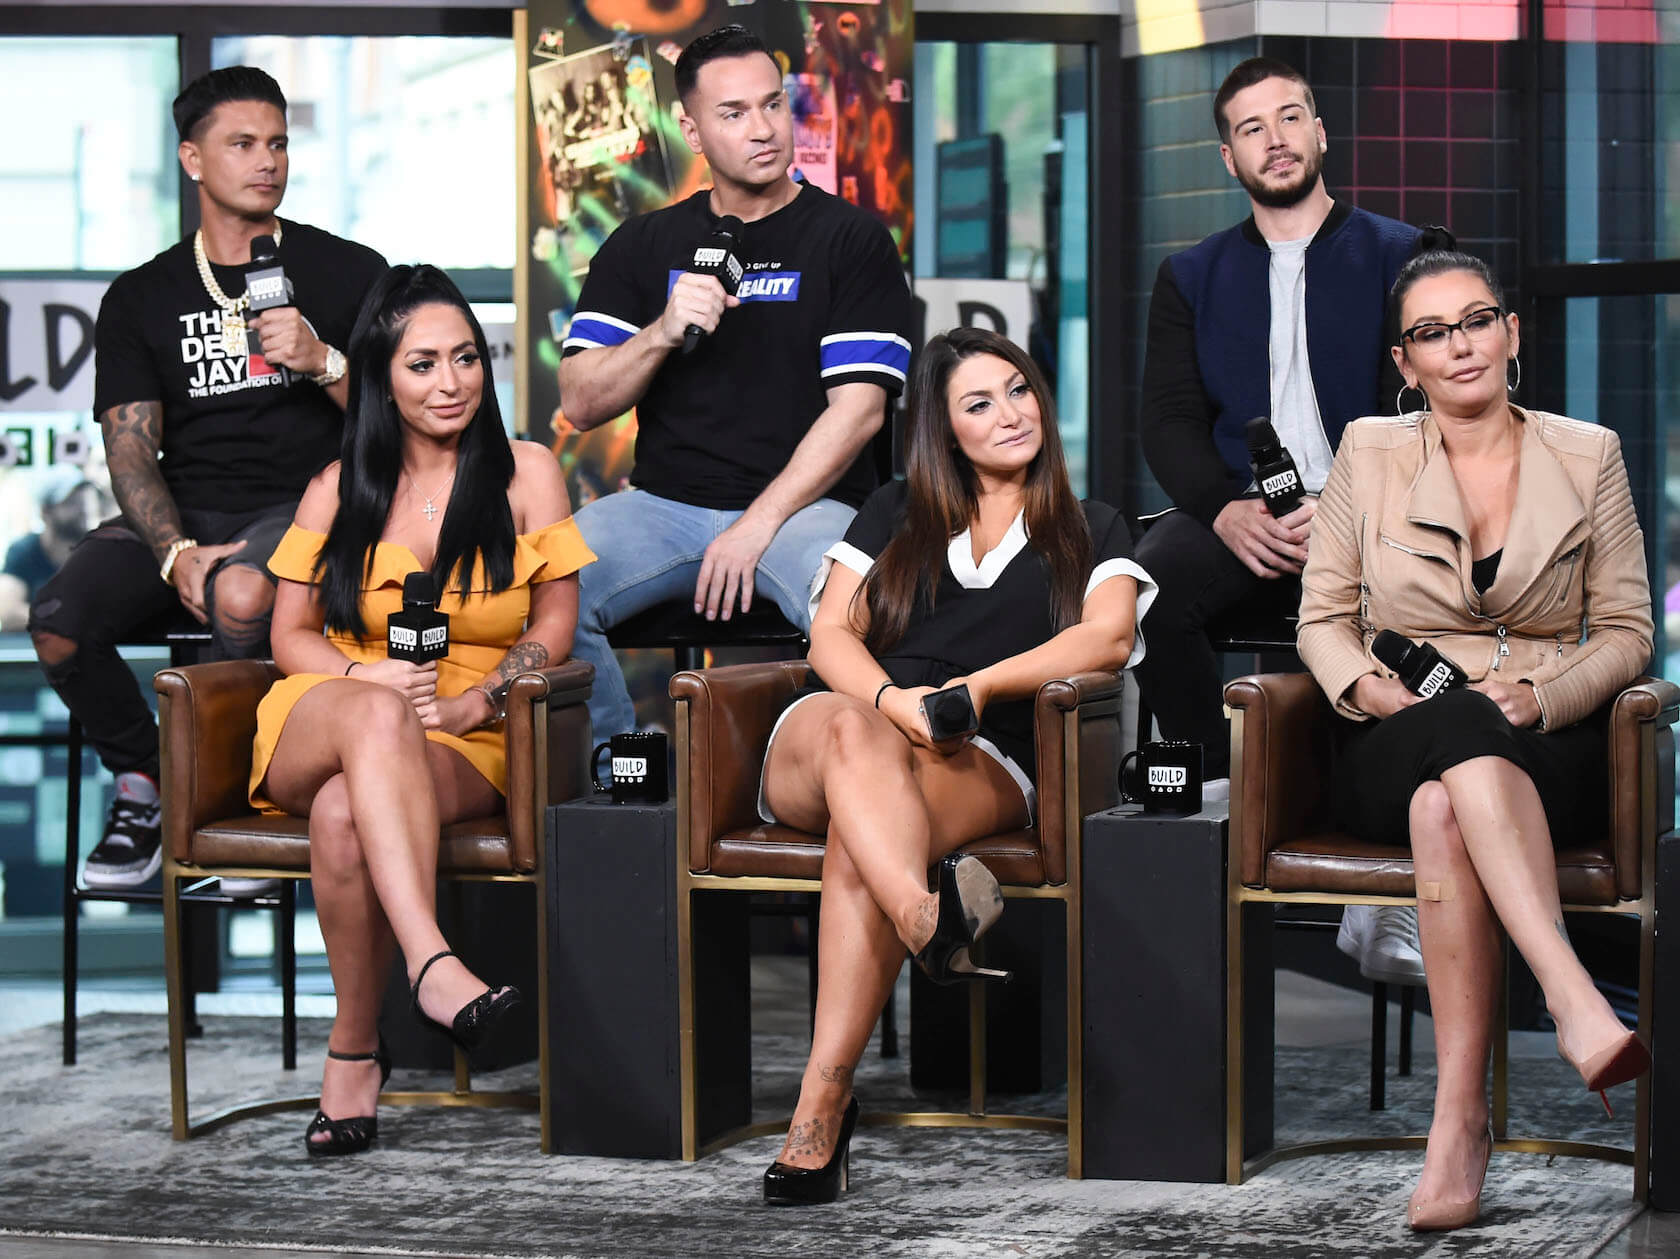 'Jersey Shore: Family Vacation' Season 7 stars Paul 'Pauly D' DelVecchio, Mike 'The Situation' Sorrentino, Vinny Guadagnino, Angelina Pivarnick, Deena Nicole Cortese, and Jenni 'JWoww' Farley sitting down for an interview